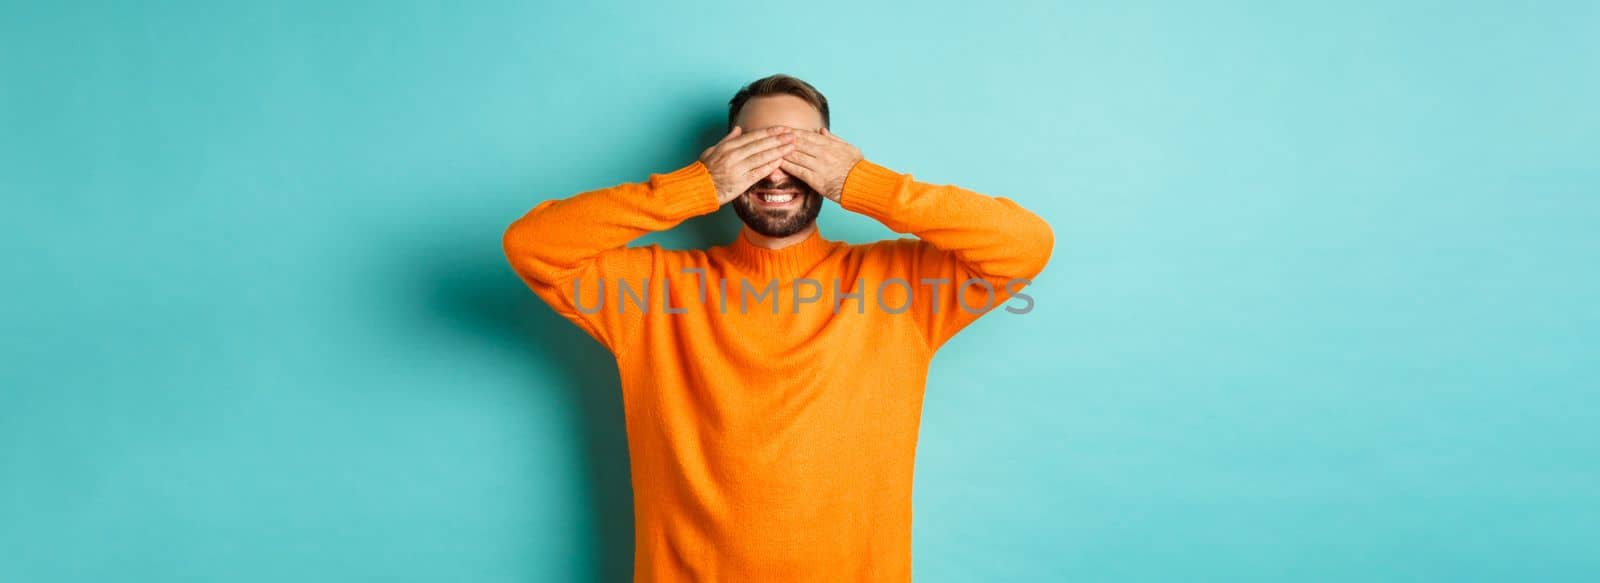 Happy bearded man waiting for surprise, shut ears and expeting gifts, standing over light blue background.